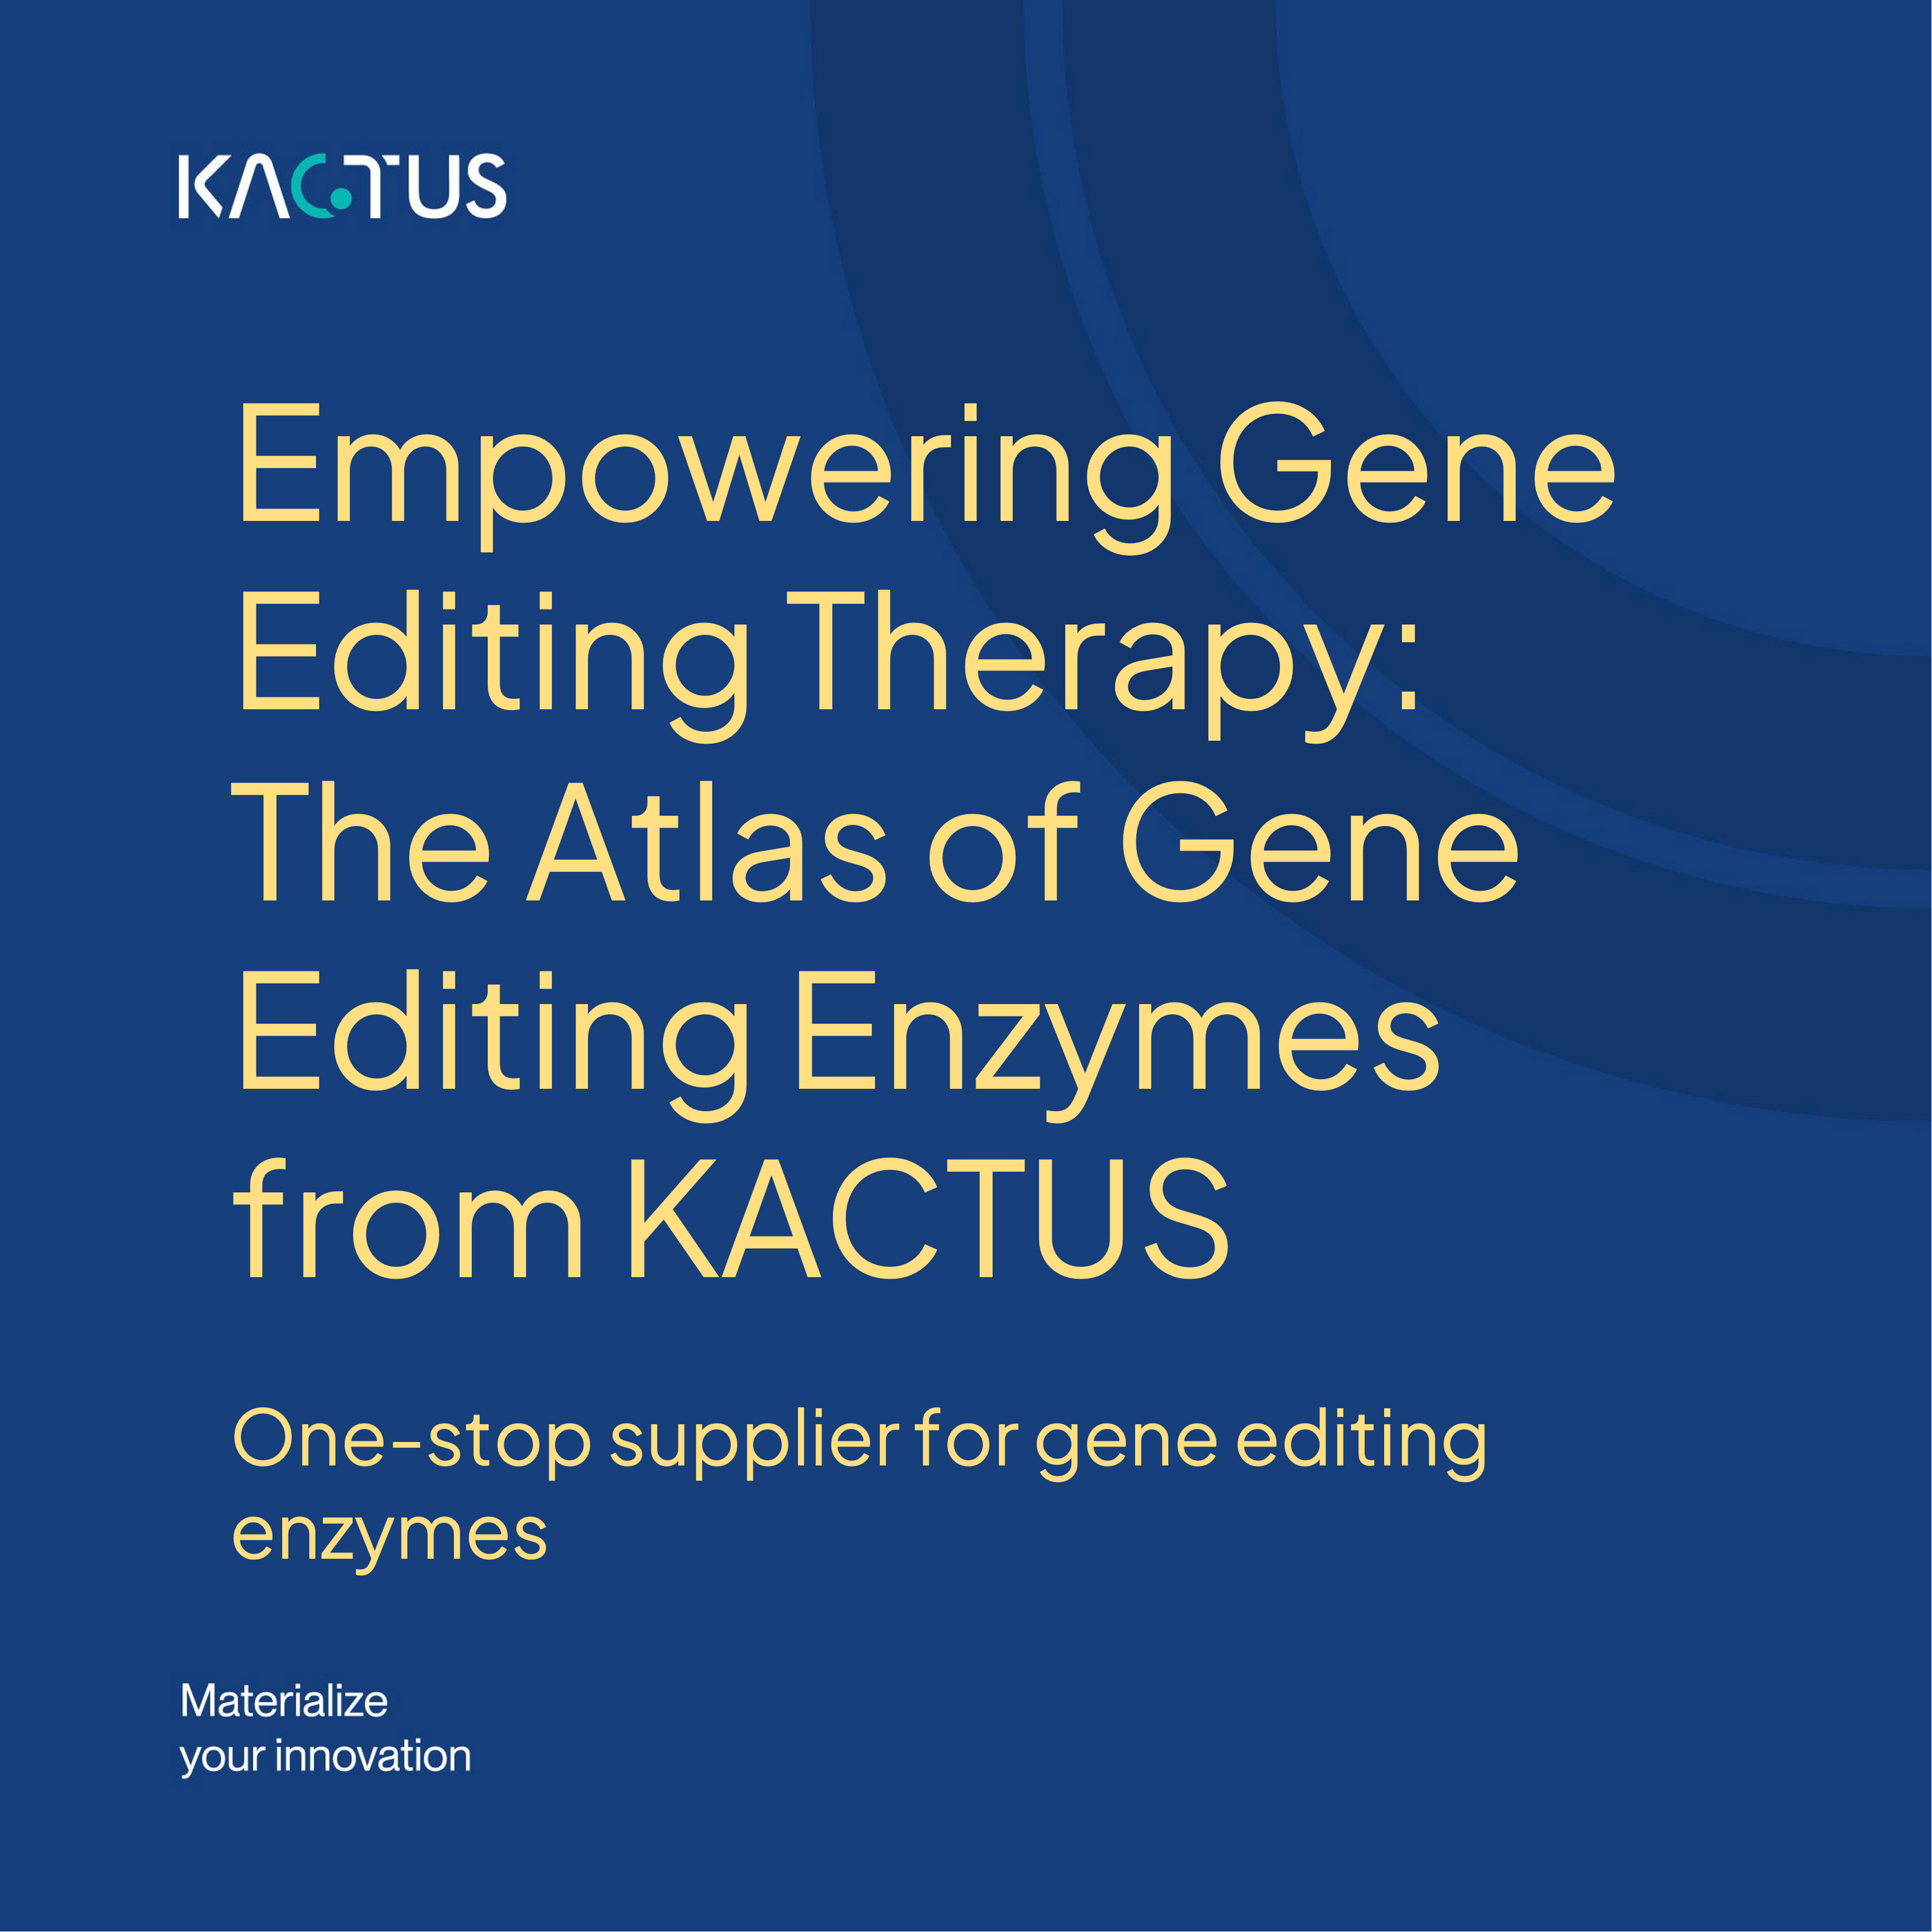 Empowering Gene Editing Therapy: The Atlas of Gene Editing Enzymes from KACTUS